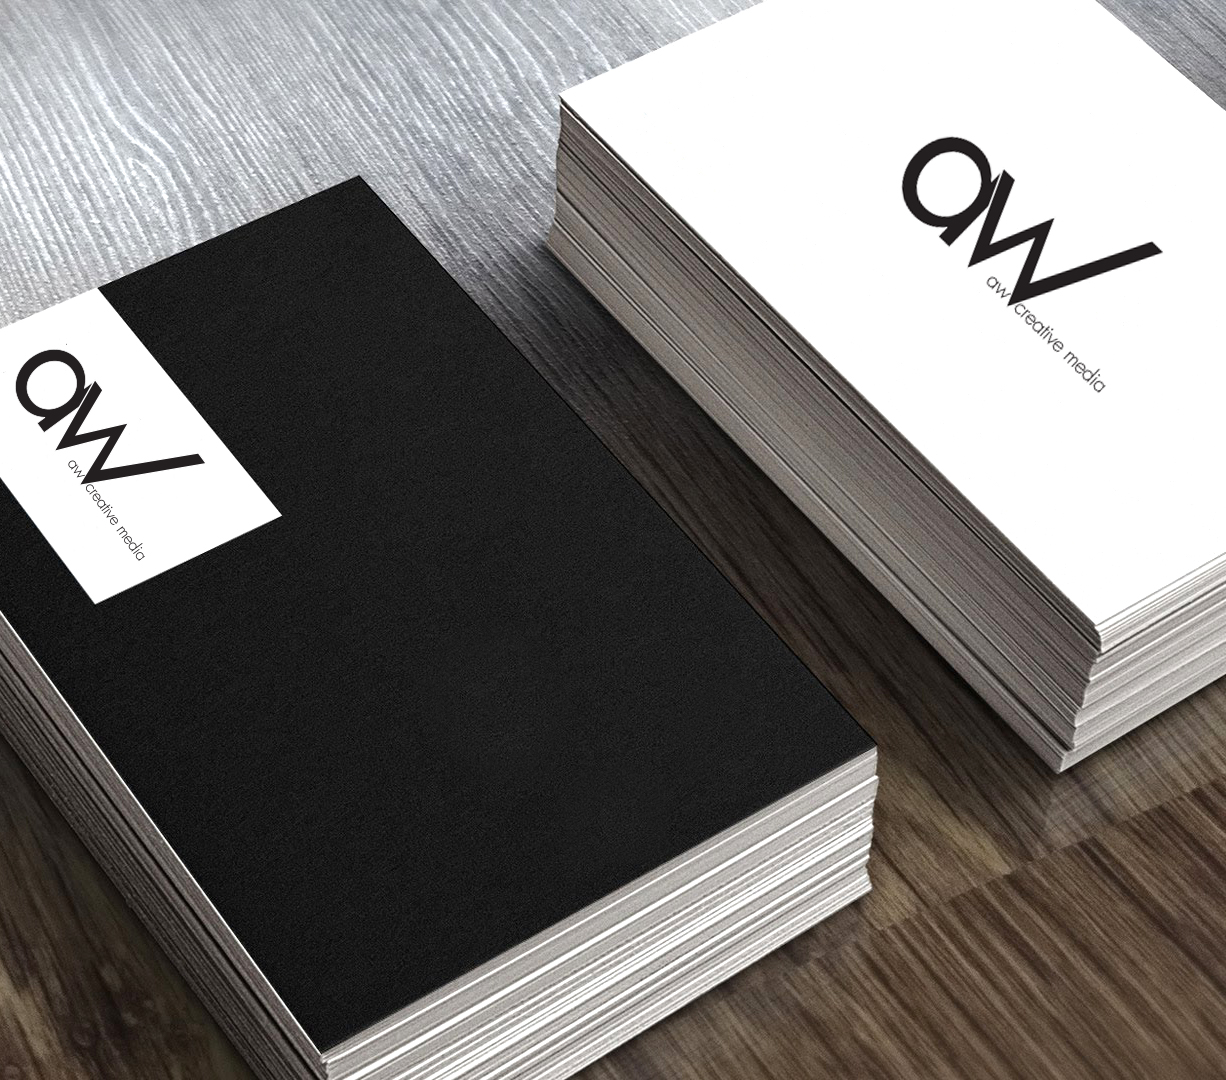 Printed custom business cards with logo